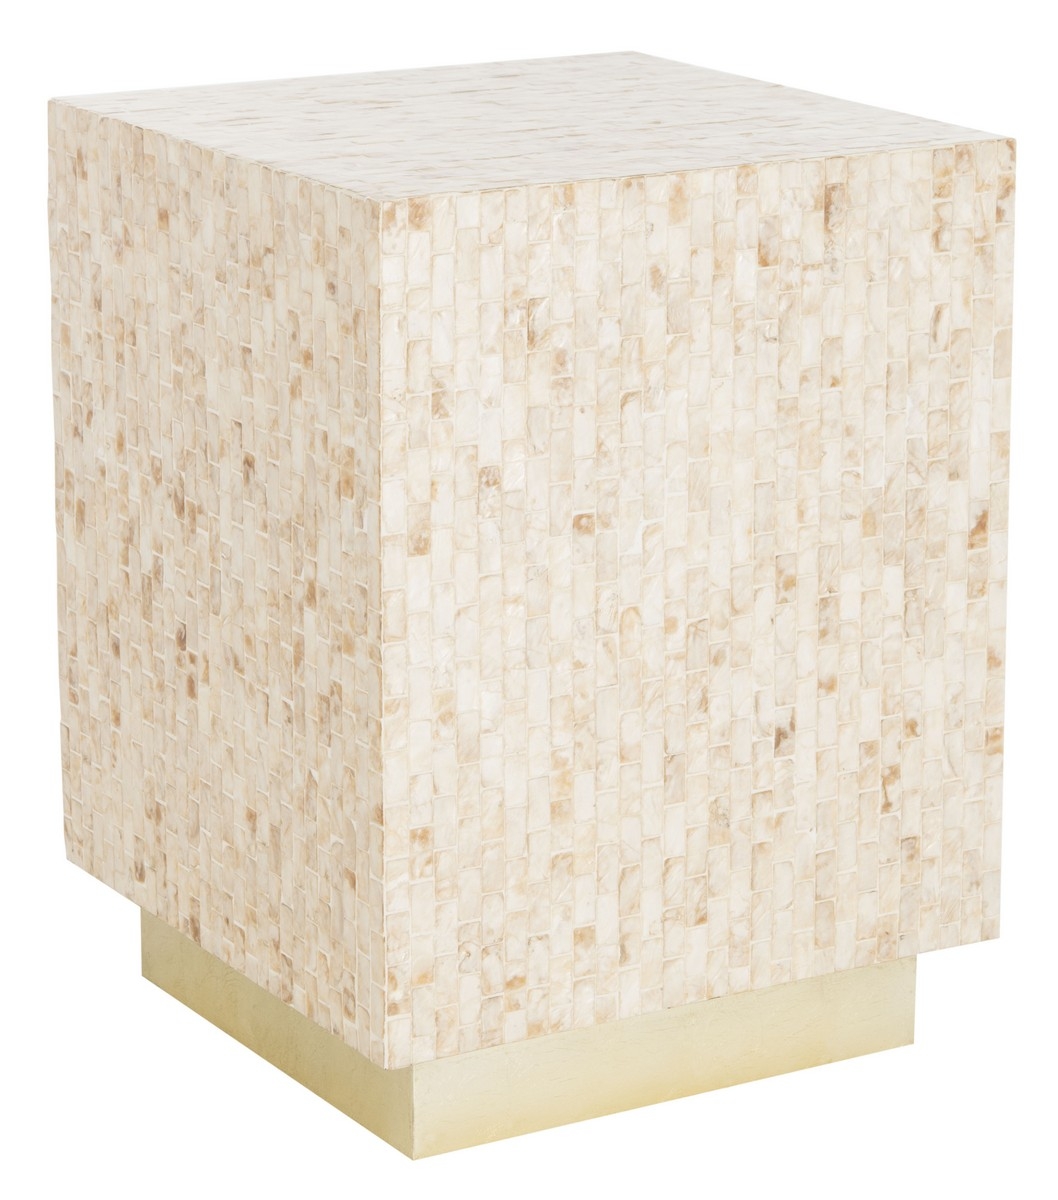 Juno Rectangle Mosaic Side Table - Multi Beige/Gold - Arlo Home - Image 2